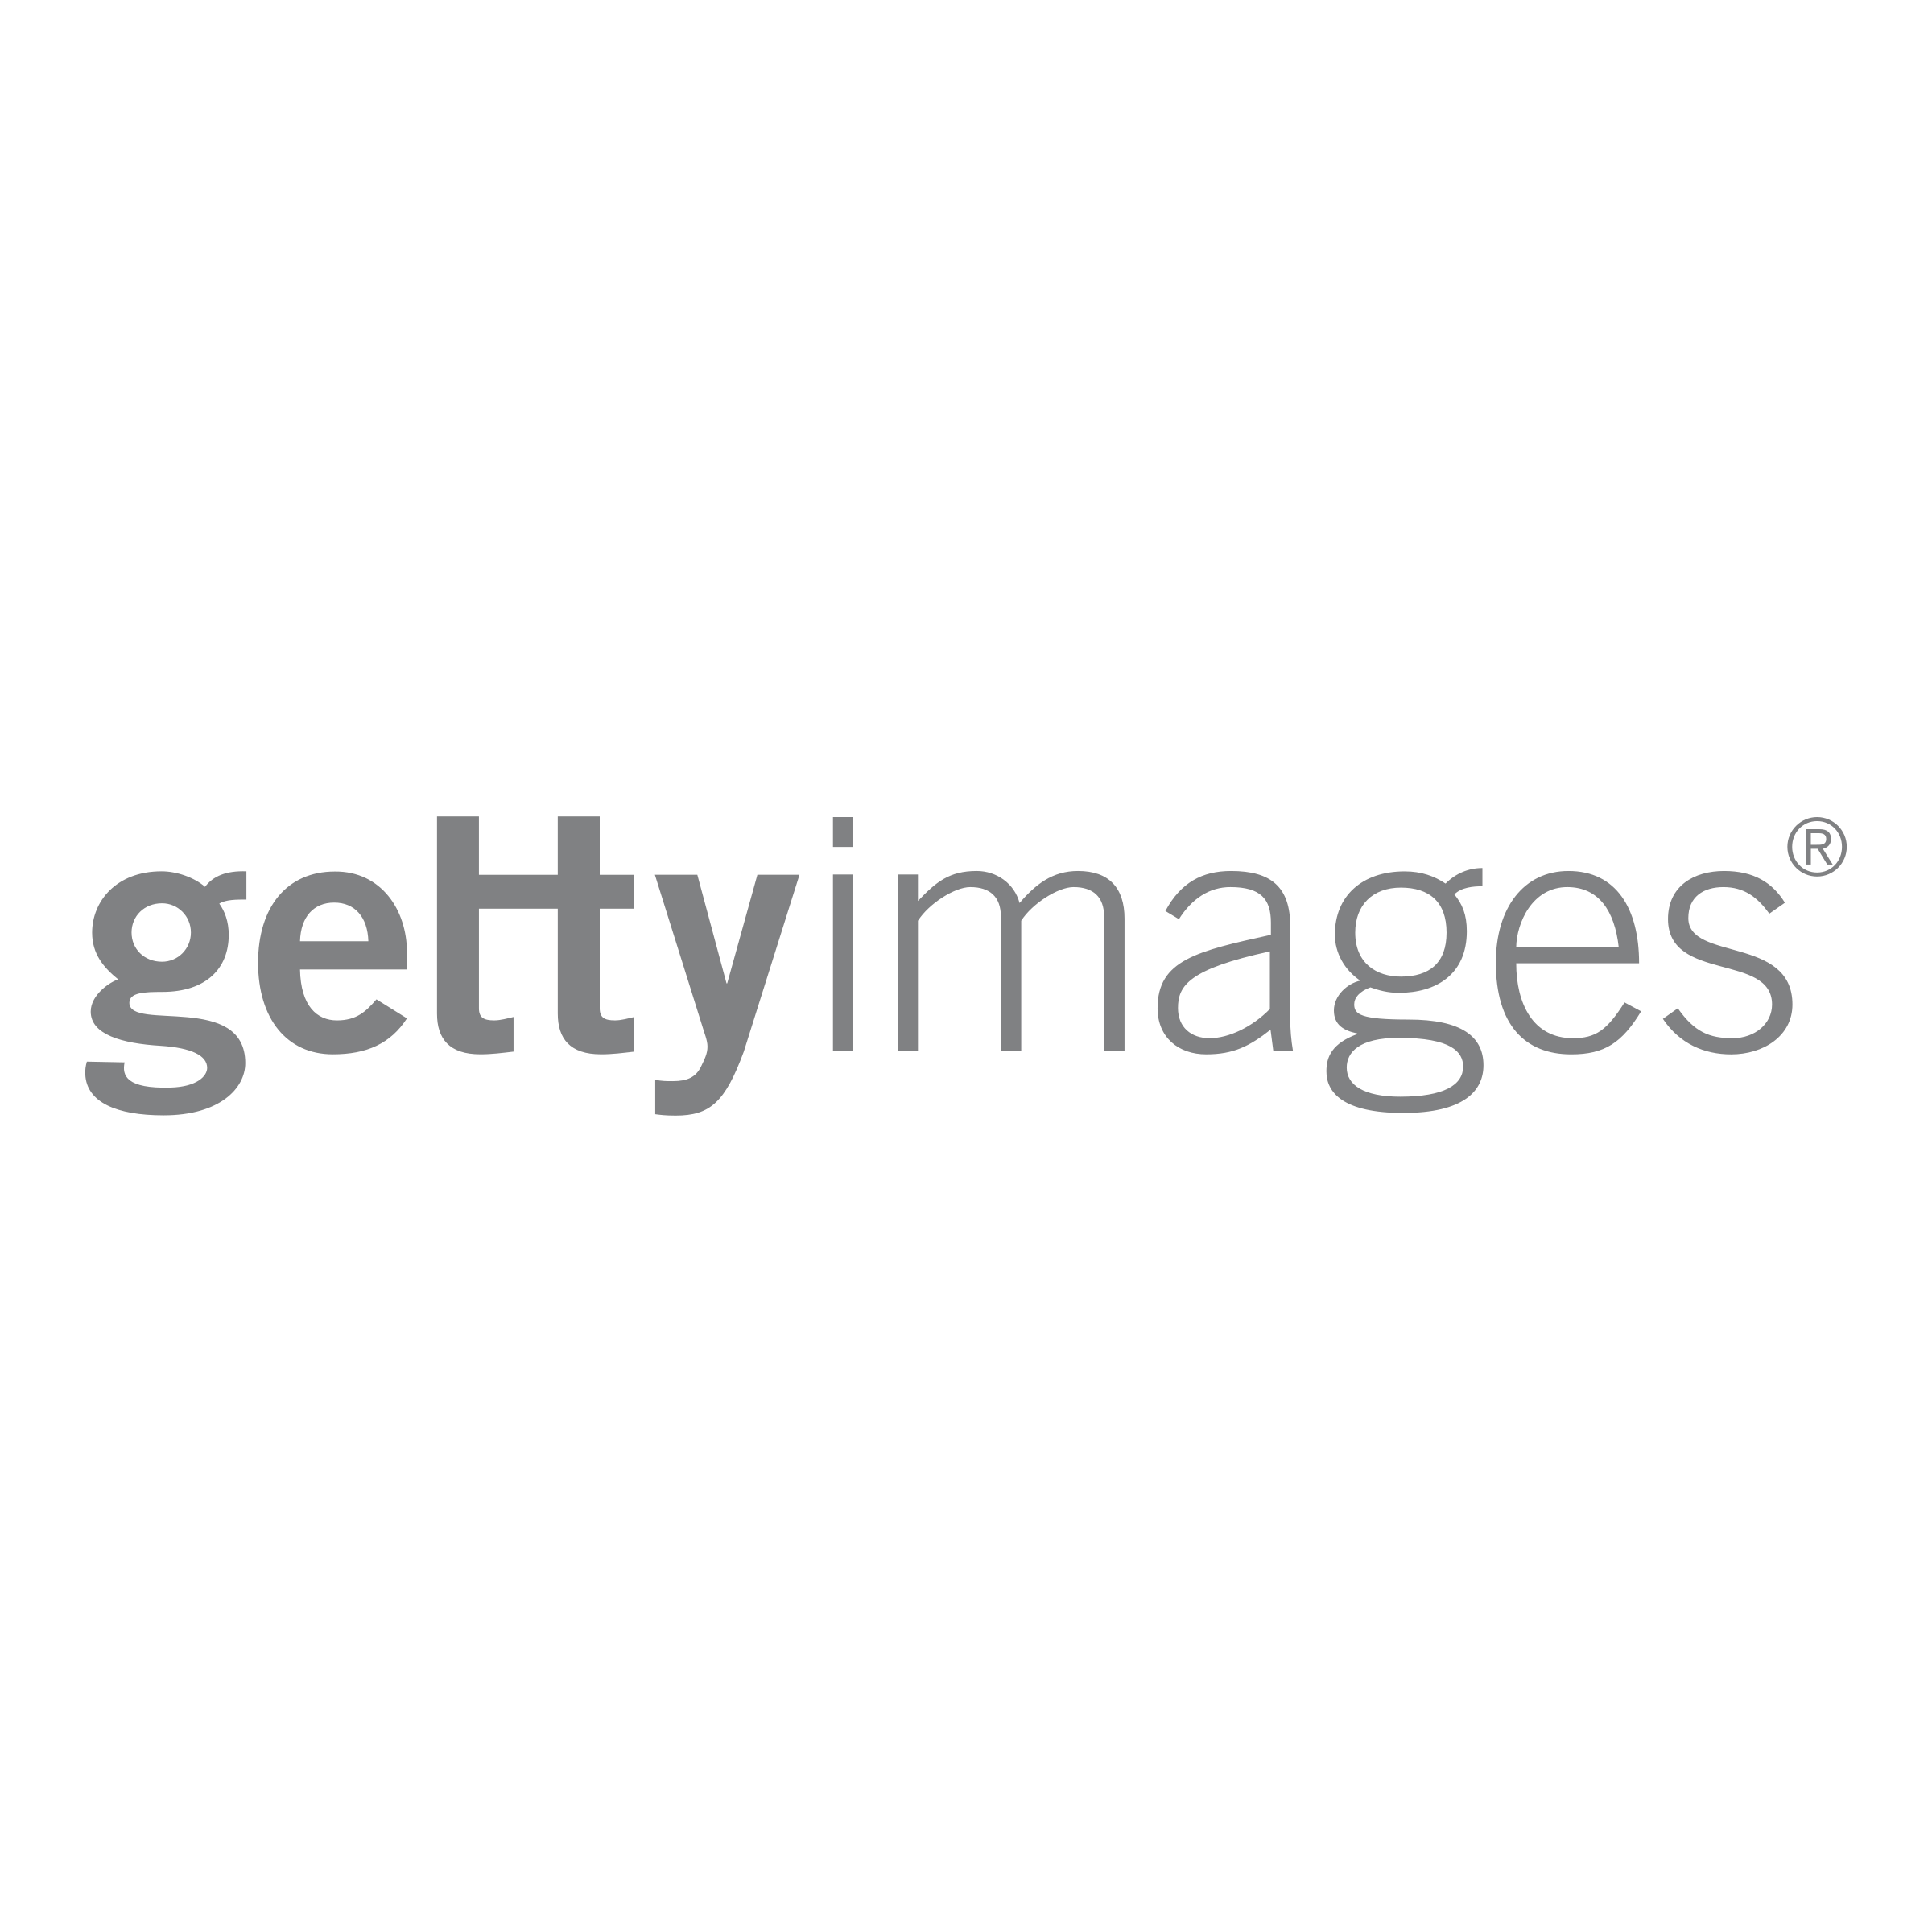 getty images.png